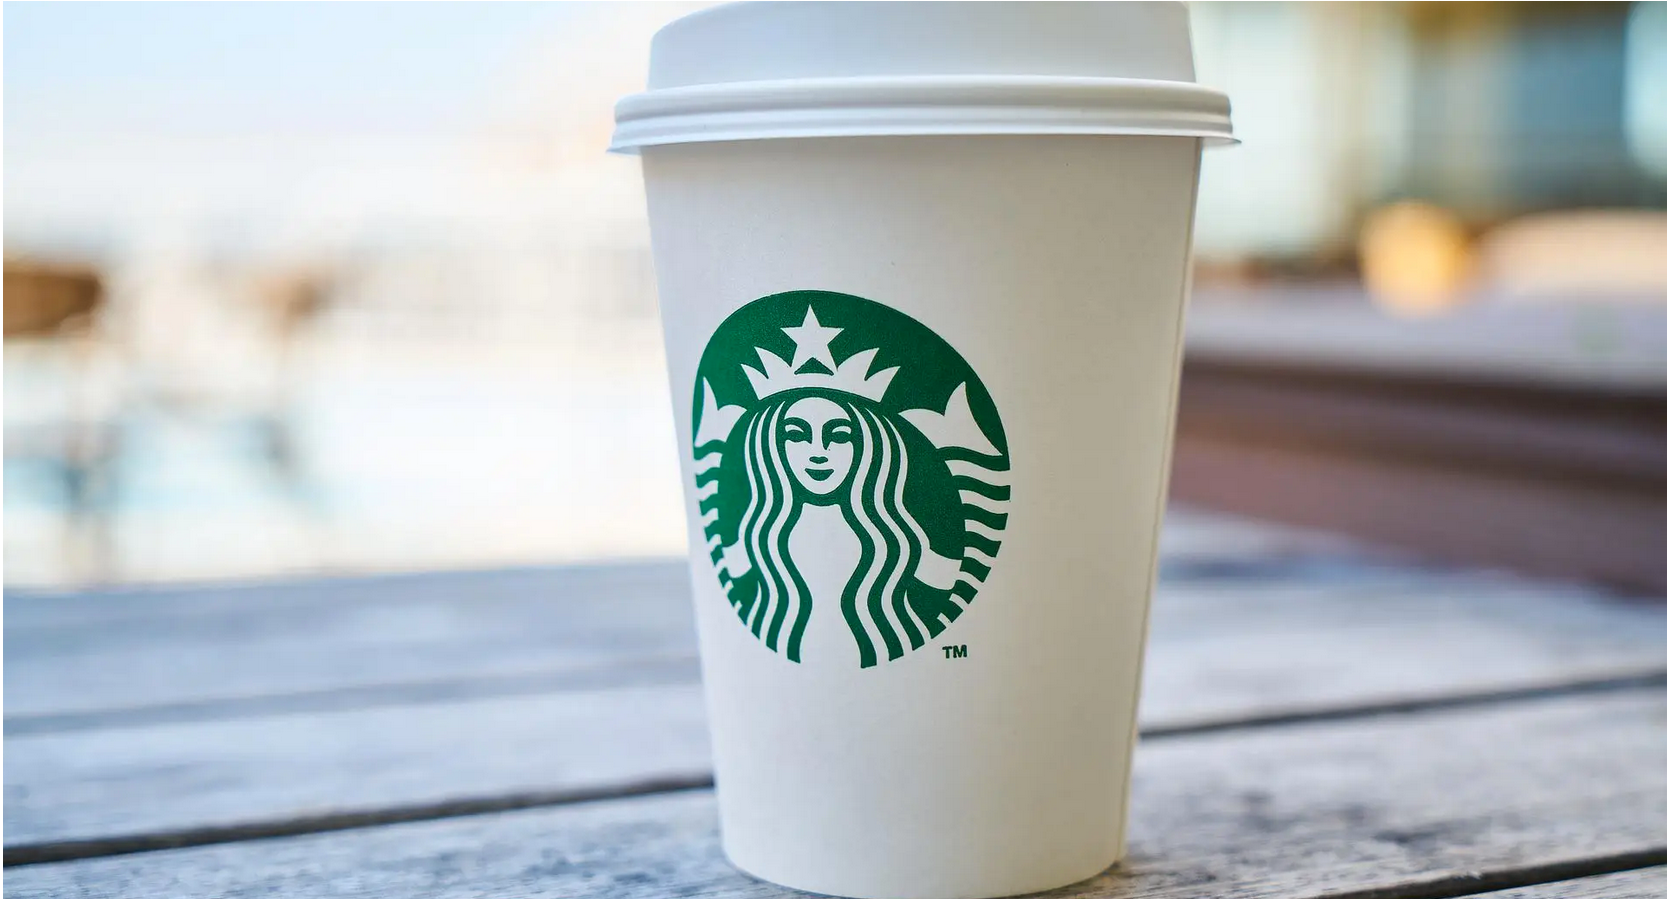 New Starbucks CEO Lacks Retail Expertise, But This Analyst Is Bullish: Here's Why